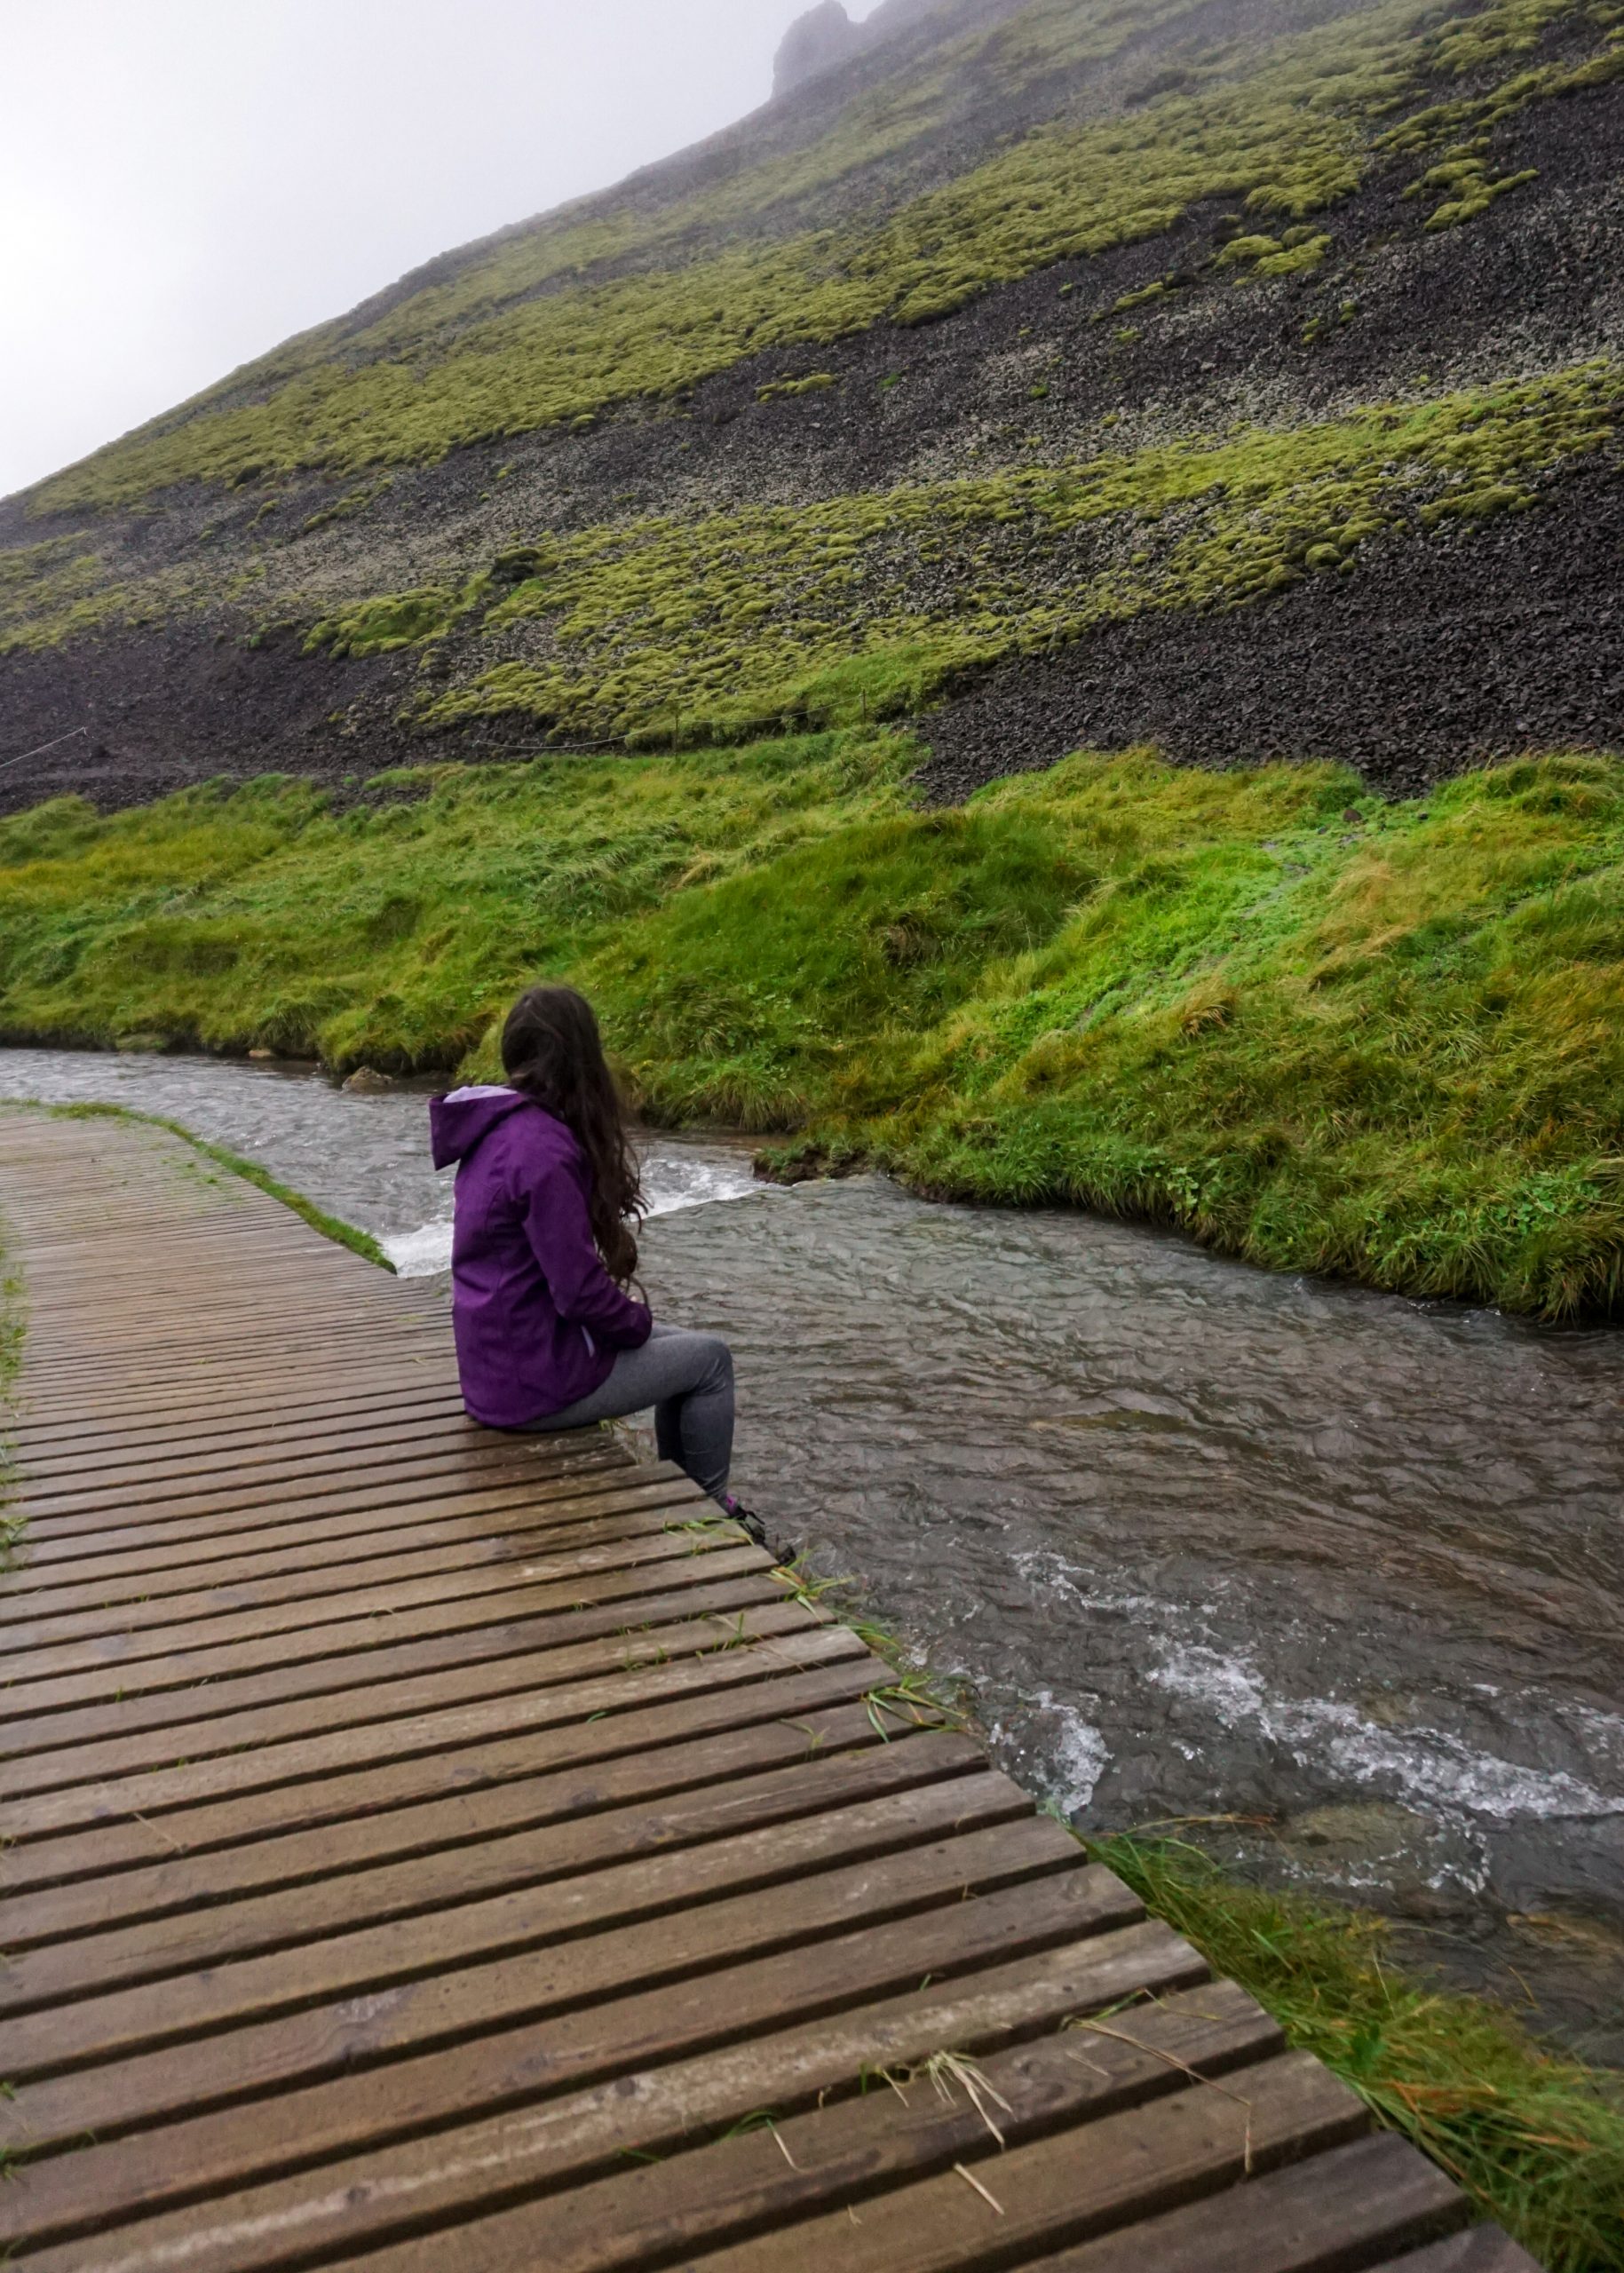 A girl in a purple jacket sitting near a hot spring in Reykjadalur Valley in Iceland